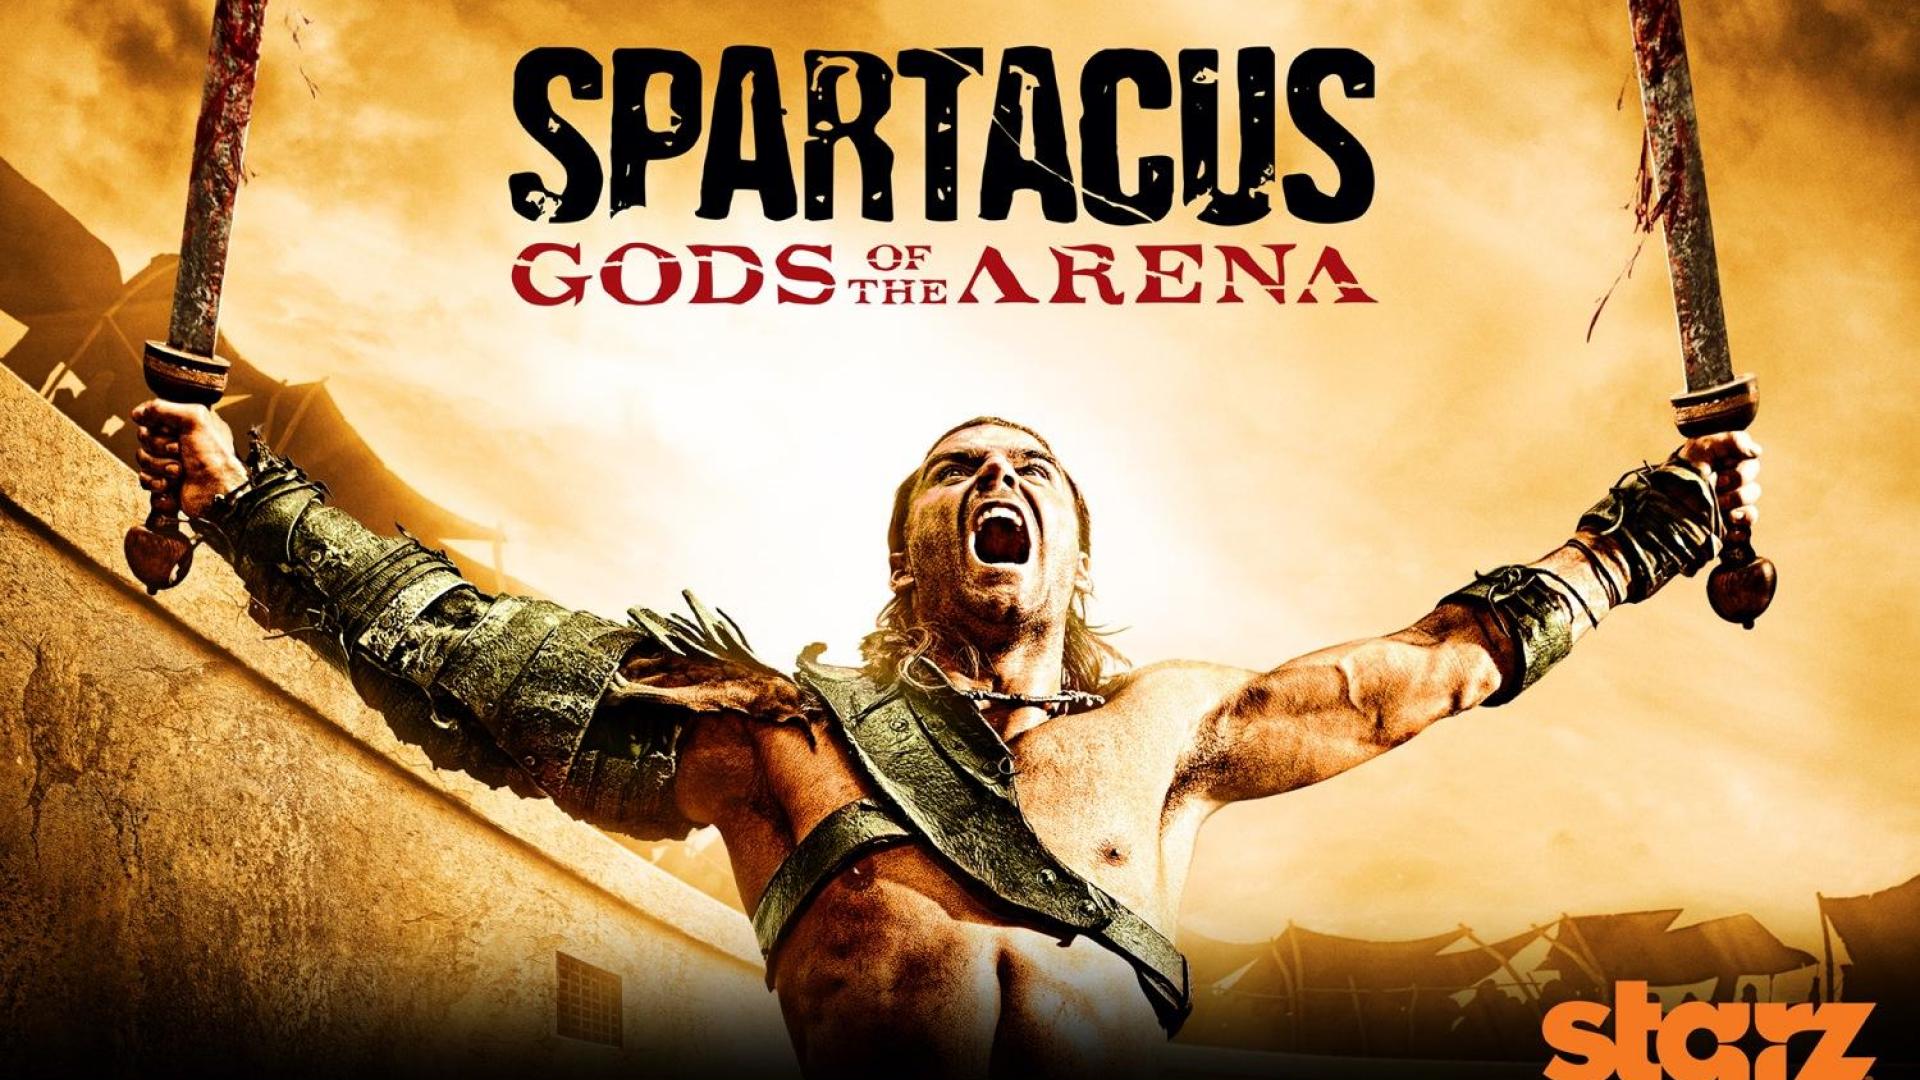 SPARTACUS GOD OF THE ARENA WALLPAPER - (#78561) - HD Wallpapers ...